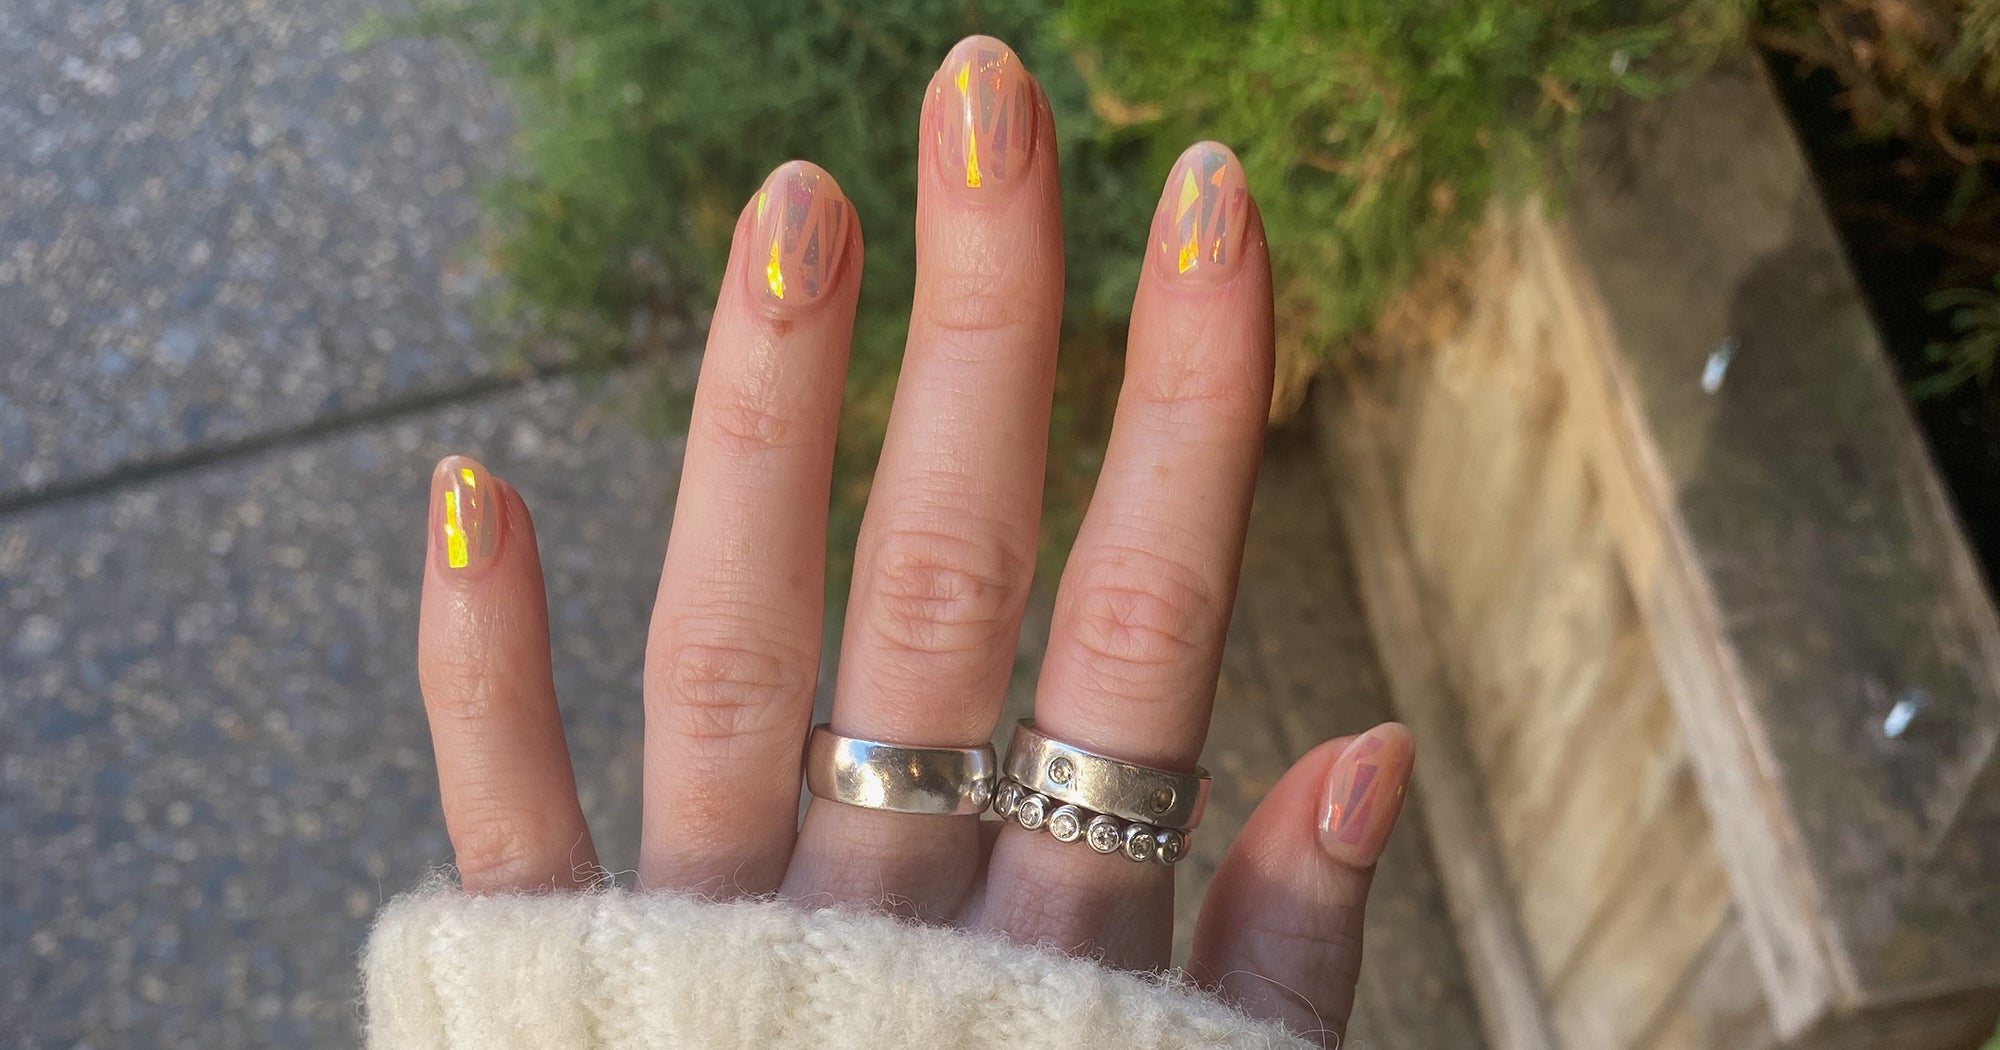 7. Glass Nail Art: The Latest Trend in Nail Design - wide 1